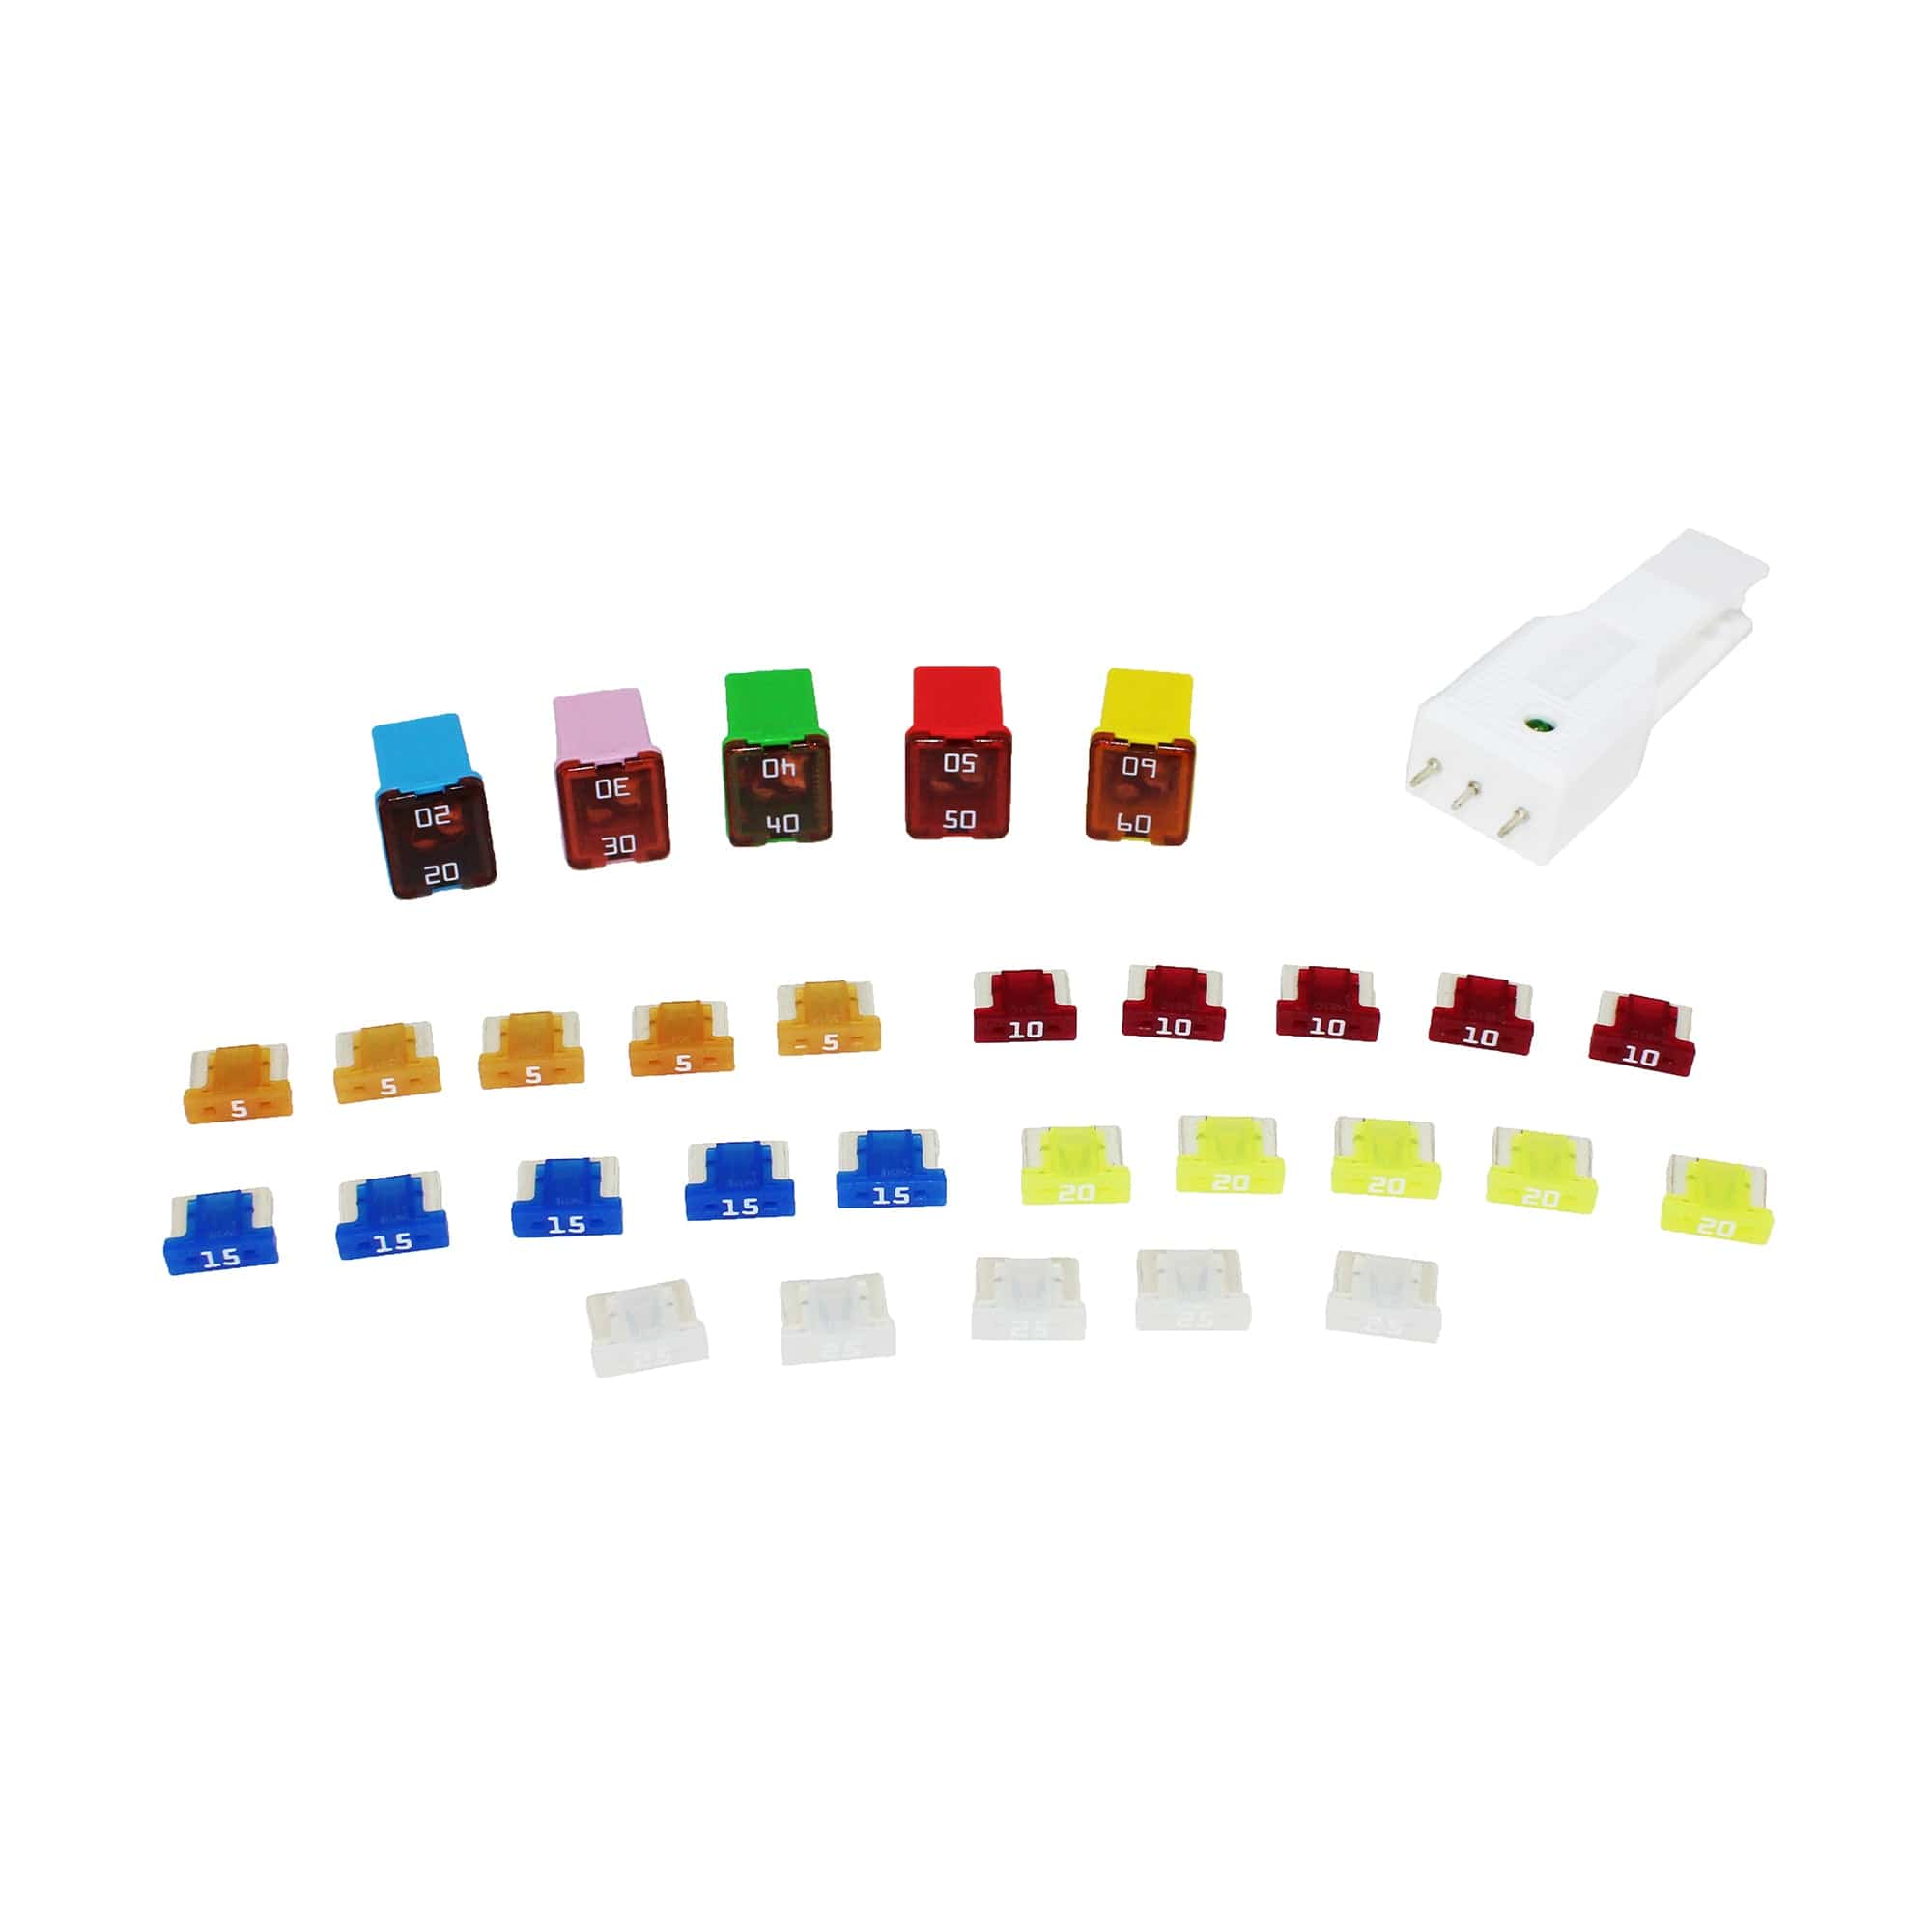 Littelfuse 00940554Z Assorted Value pack Fuse Kit Low Profile MINI / Low Profile JCASE Super Value Pack 30pc